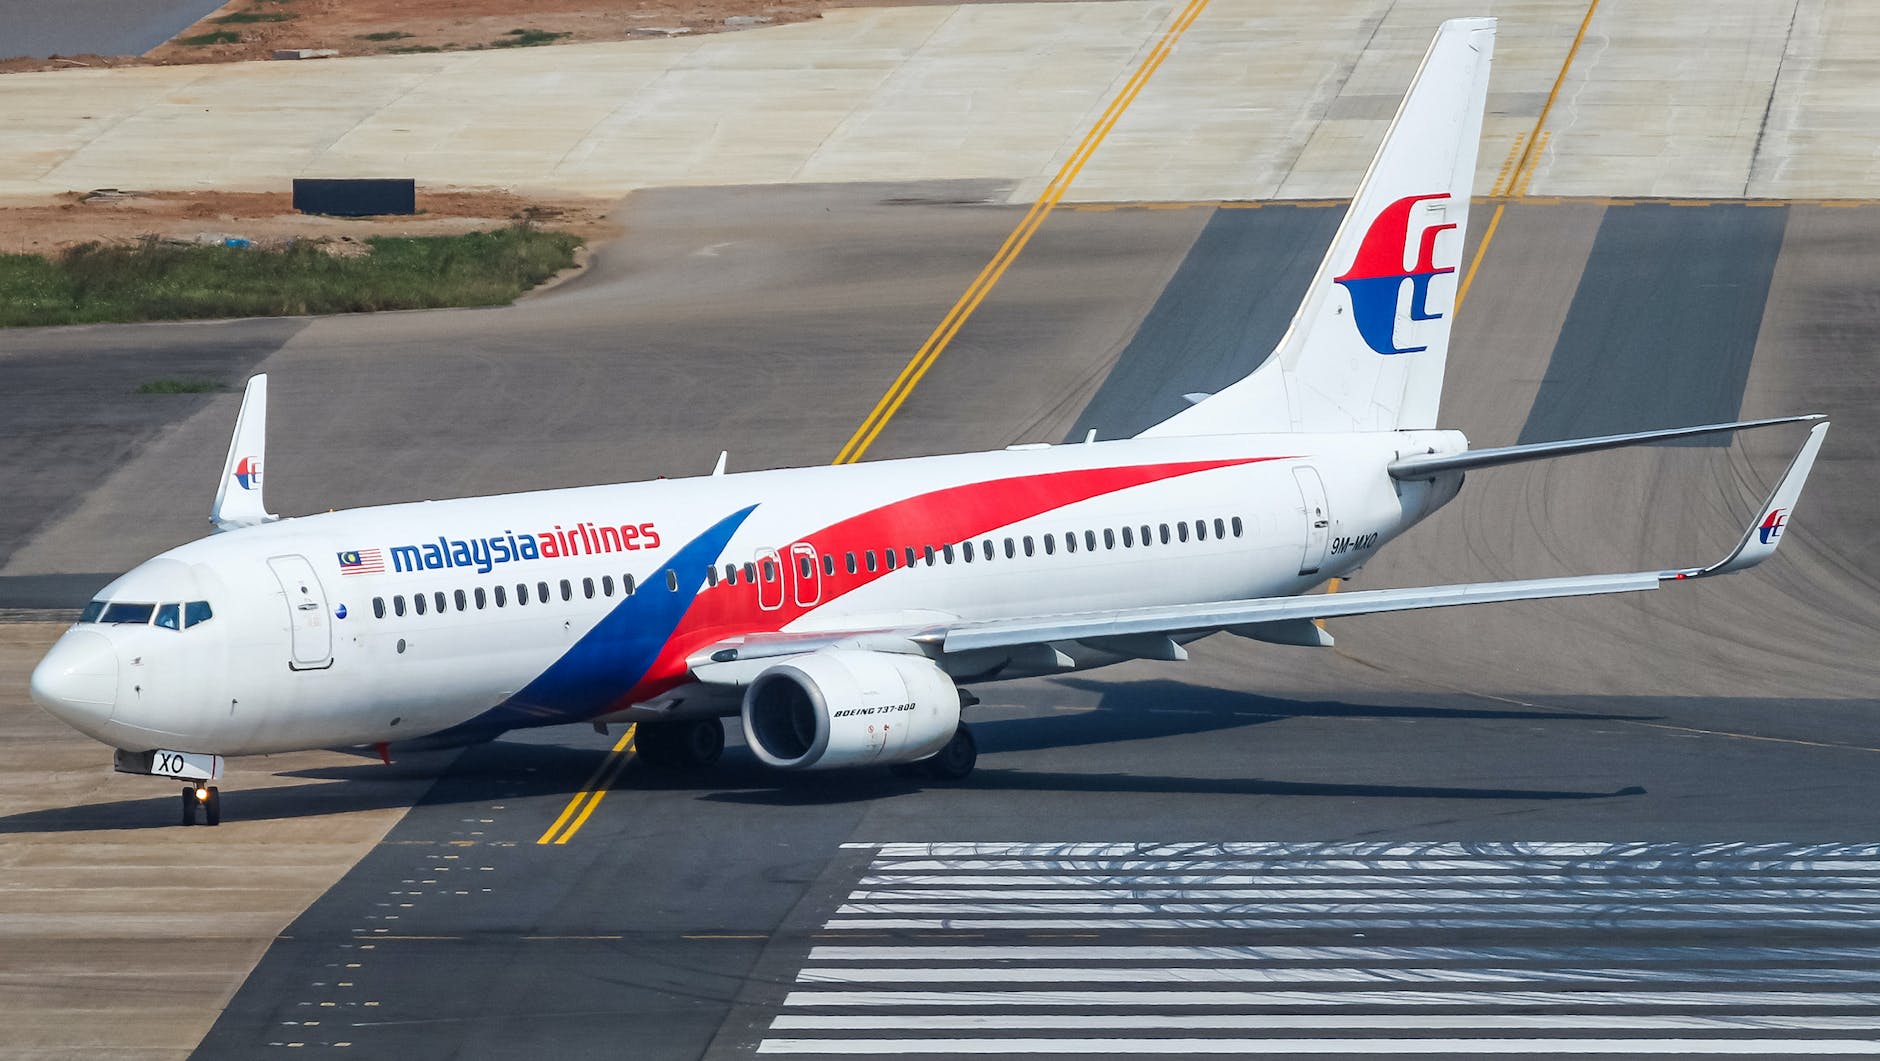 a malaysia airlines airplane taxiing on runway